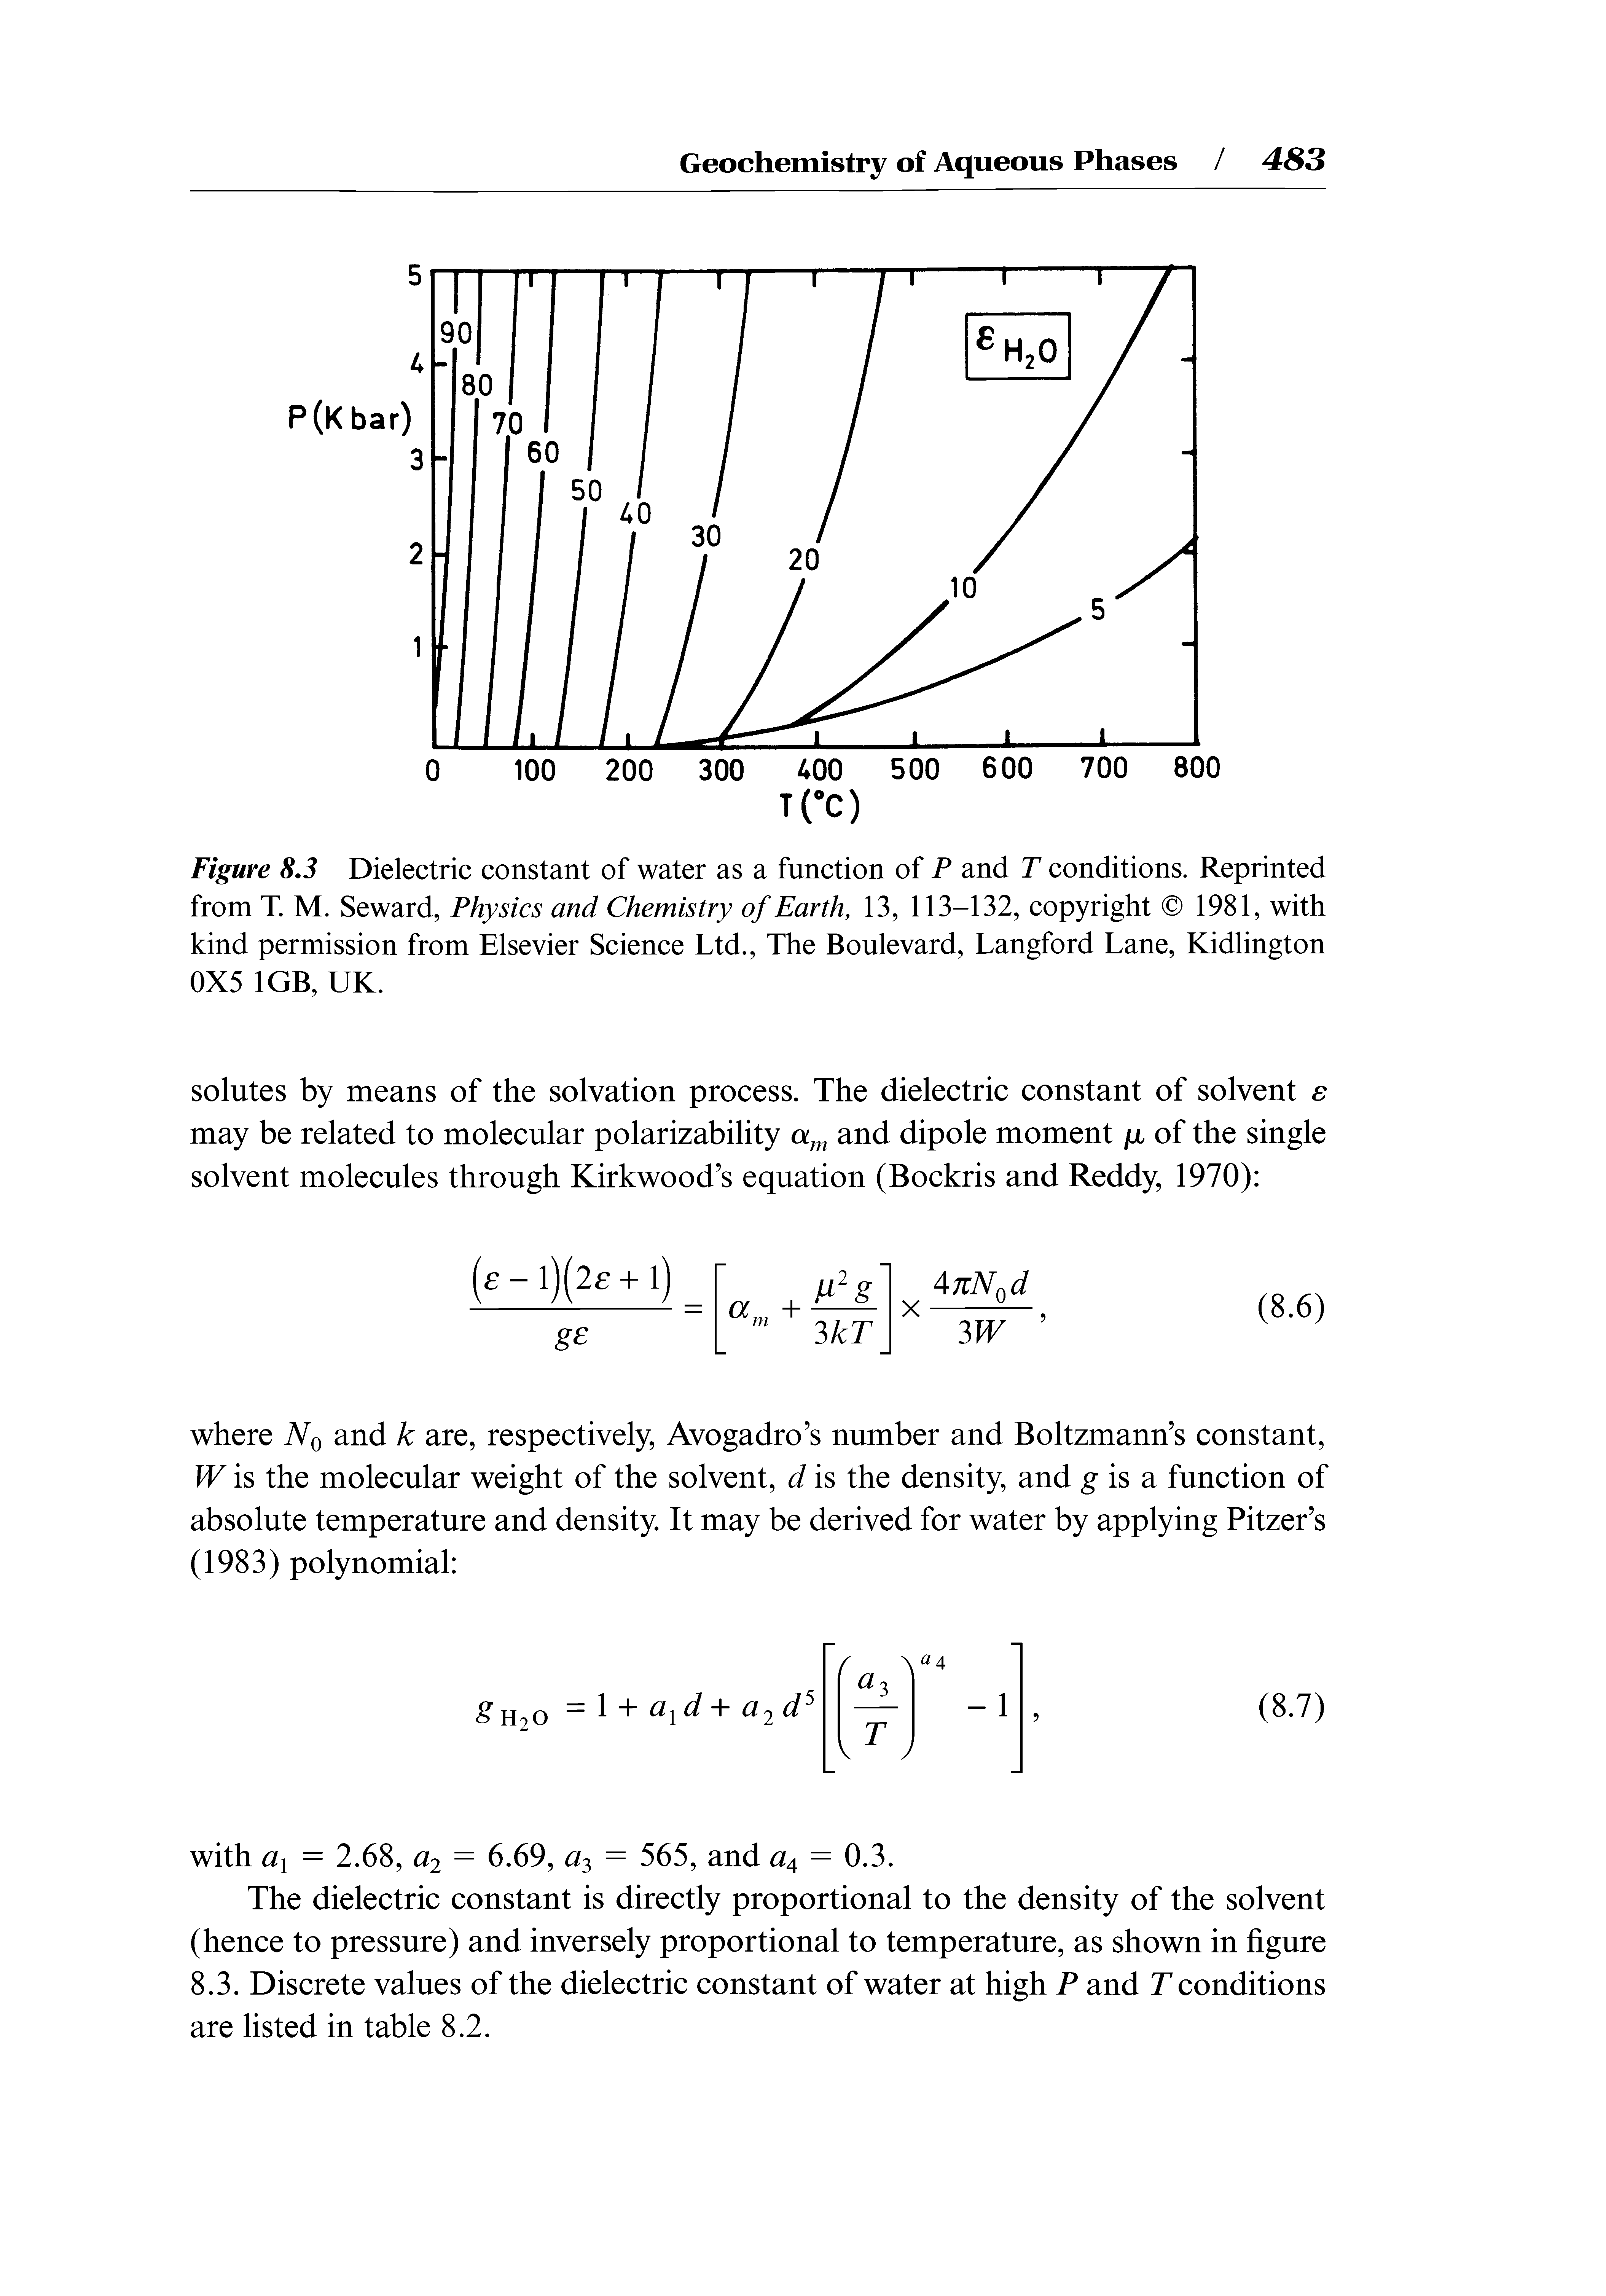 Figure 8.3 Dielectric constant of water as a function of P and T conditions. Reprinted from T. M. Seward, Physics and Chemistry of Earth, 13, 113-132, copyright 1981, with kind permission from Elsevier Science Ltd., The Boulevard, Langford Lane, Kidlington 0X5 1GB, UK.